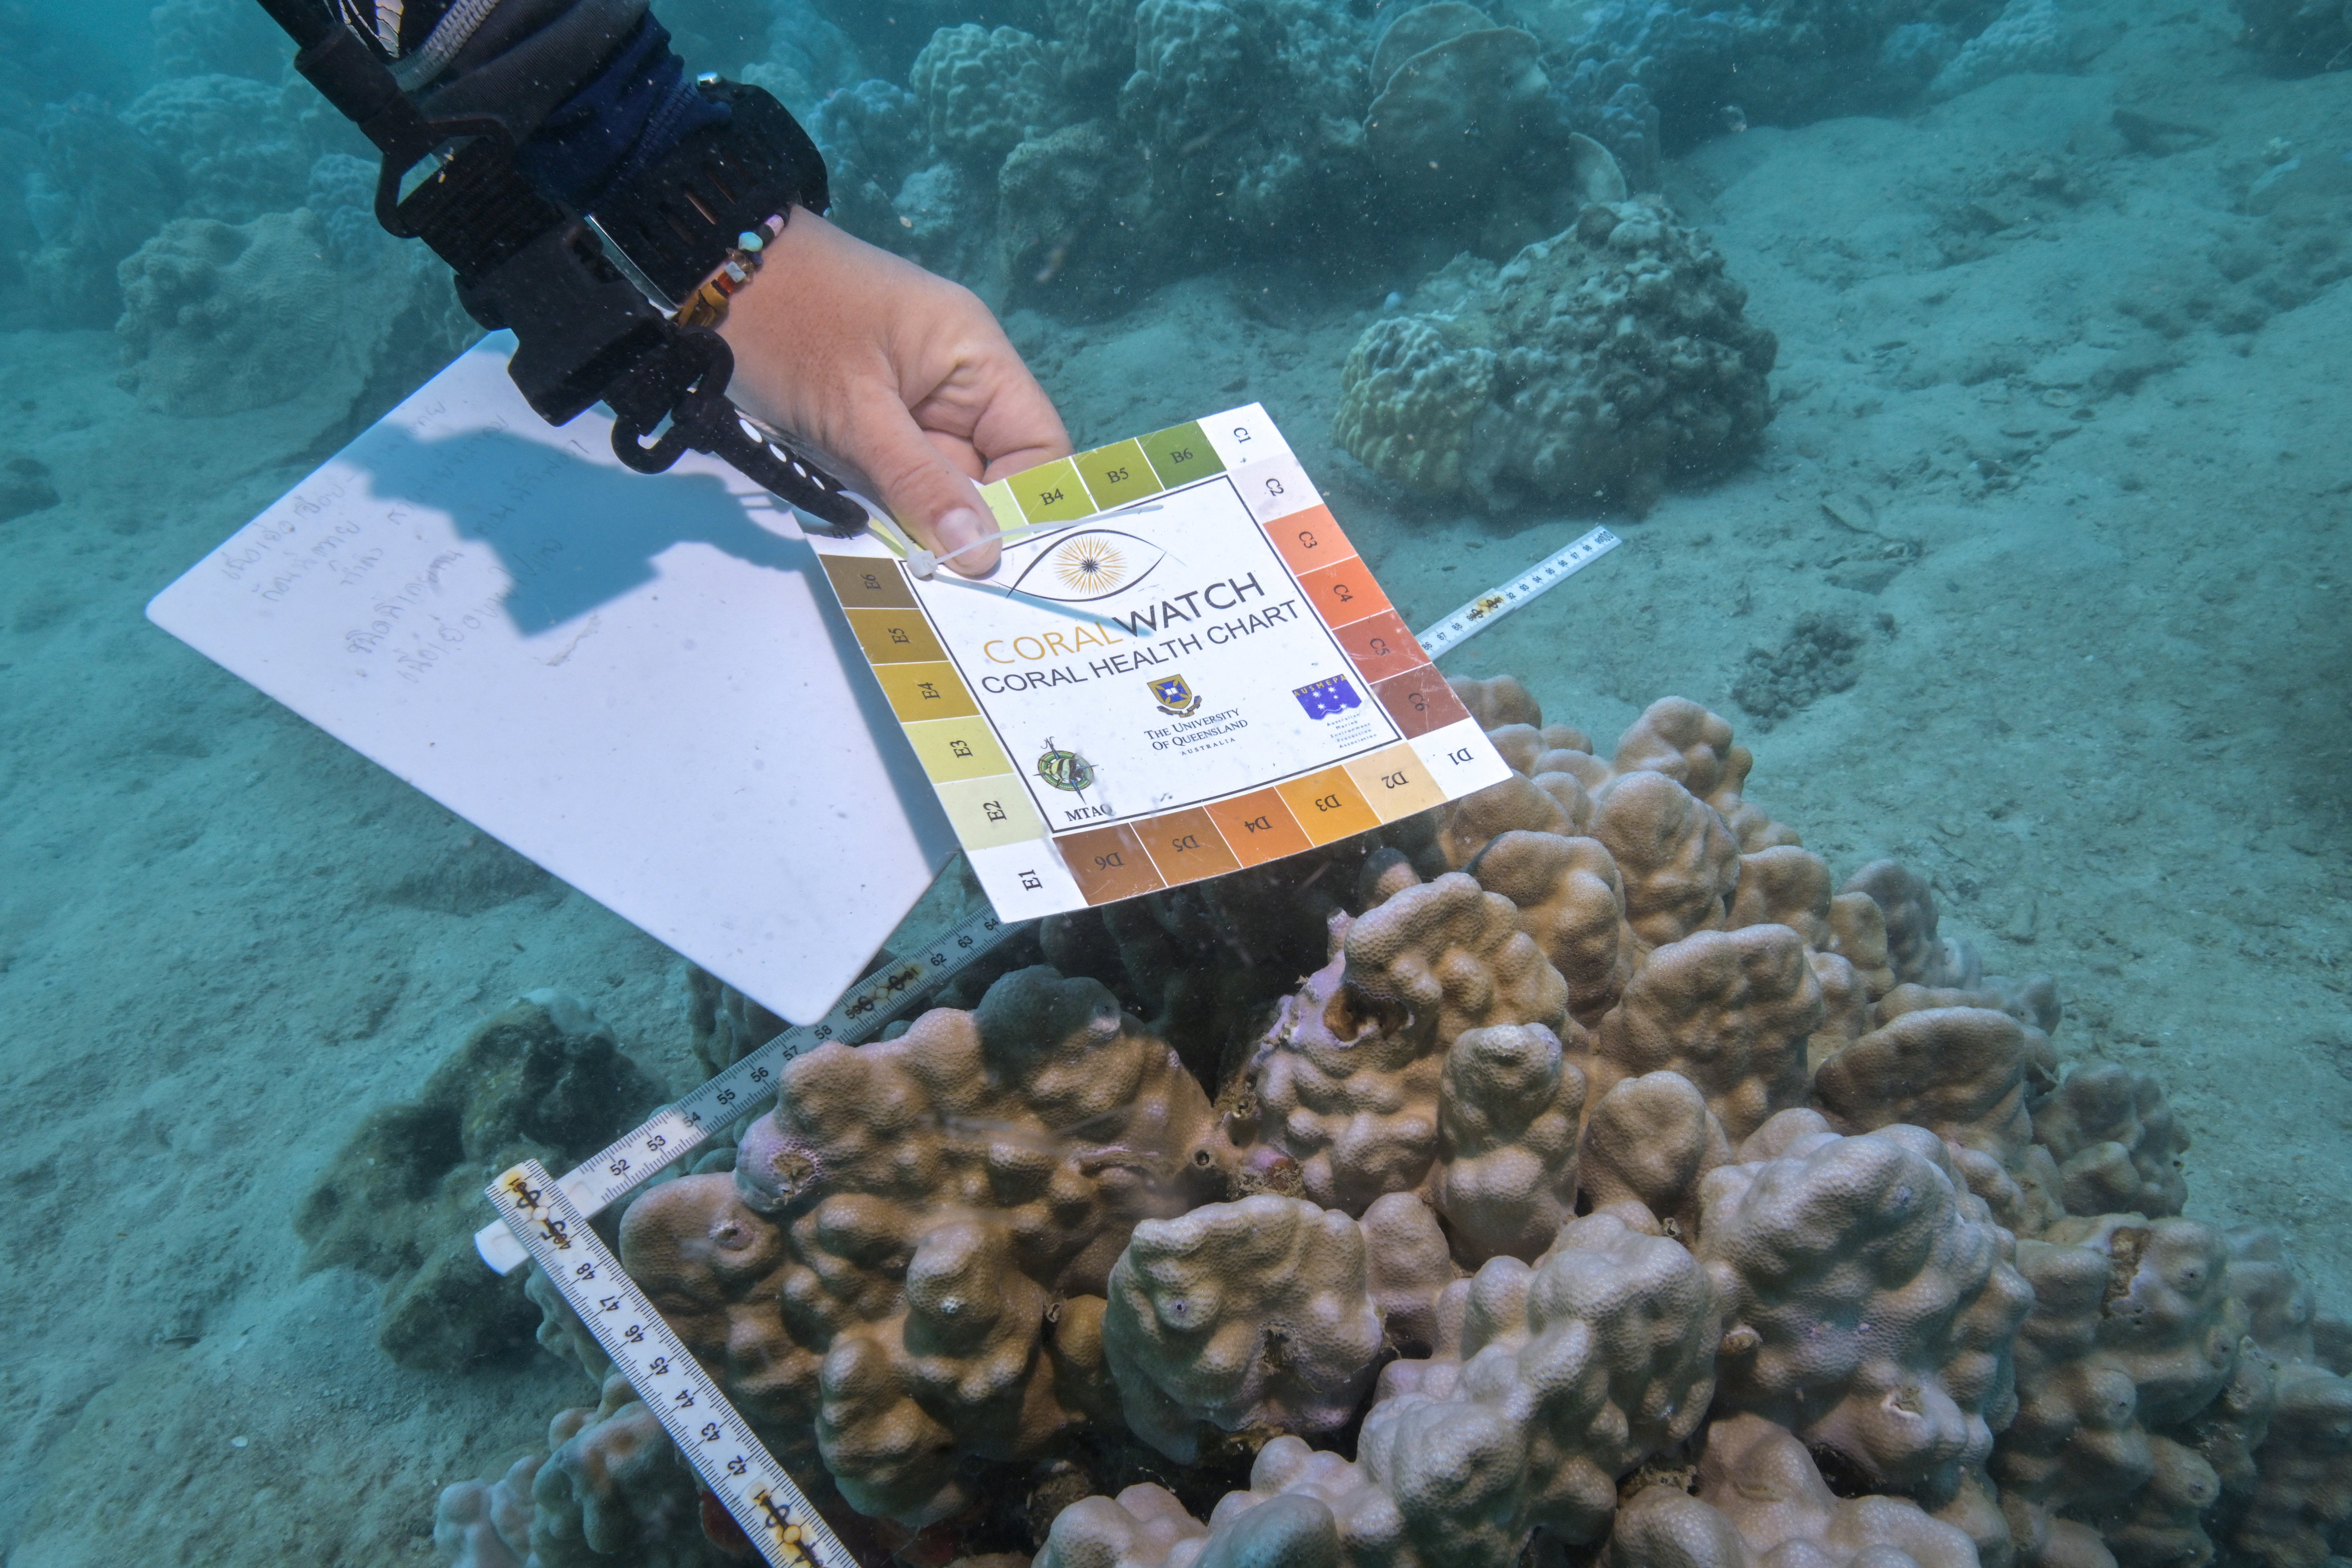 Lalita Putchim, a marine biologist of the Department of Marine and Coastal Resources (DMCR) uses a coral health chart to measure bleached corals at a reef in Koh Mak, Trat province, Thailand, May 8, 2024